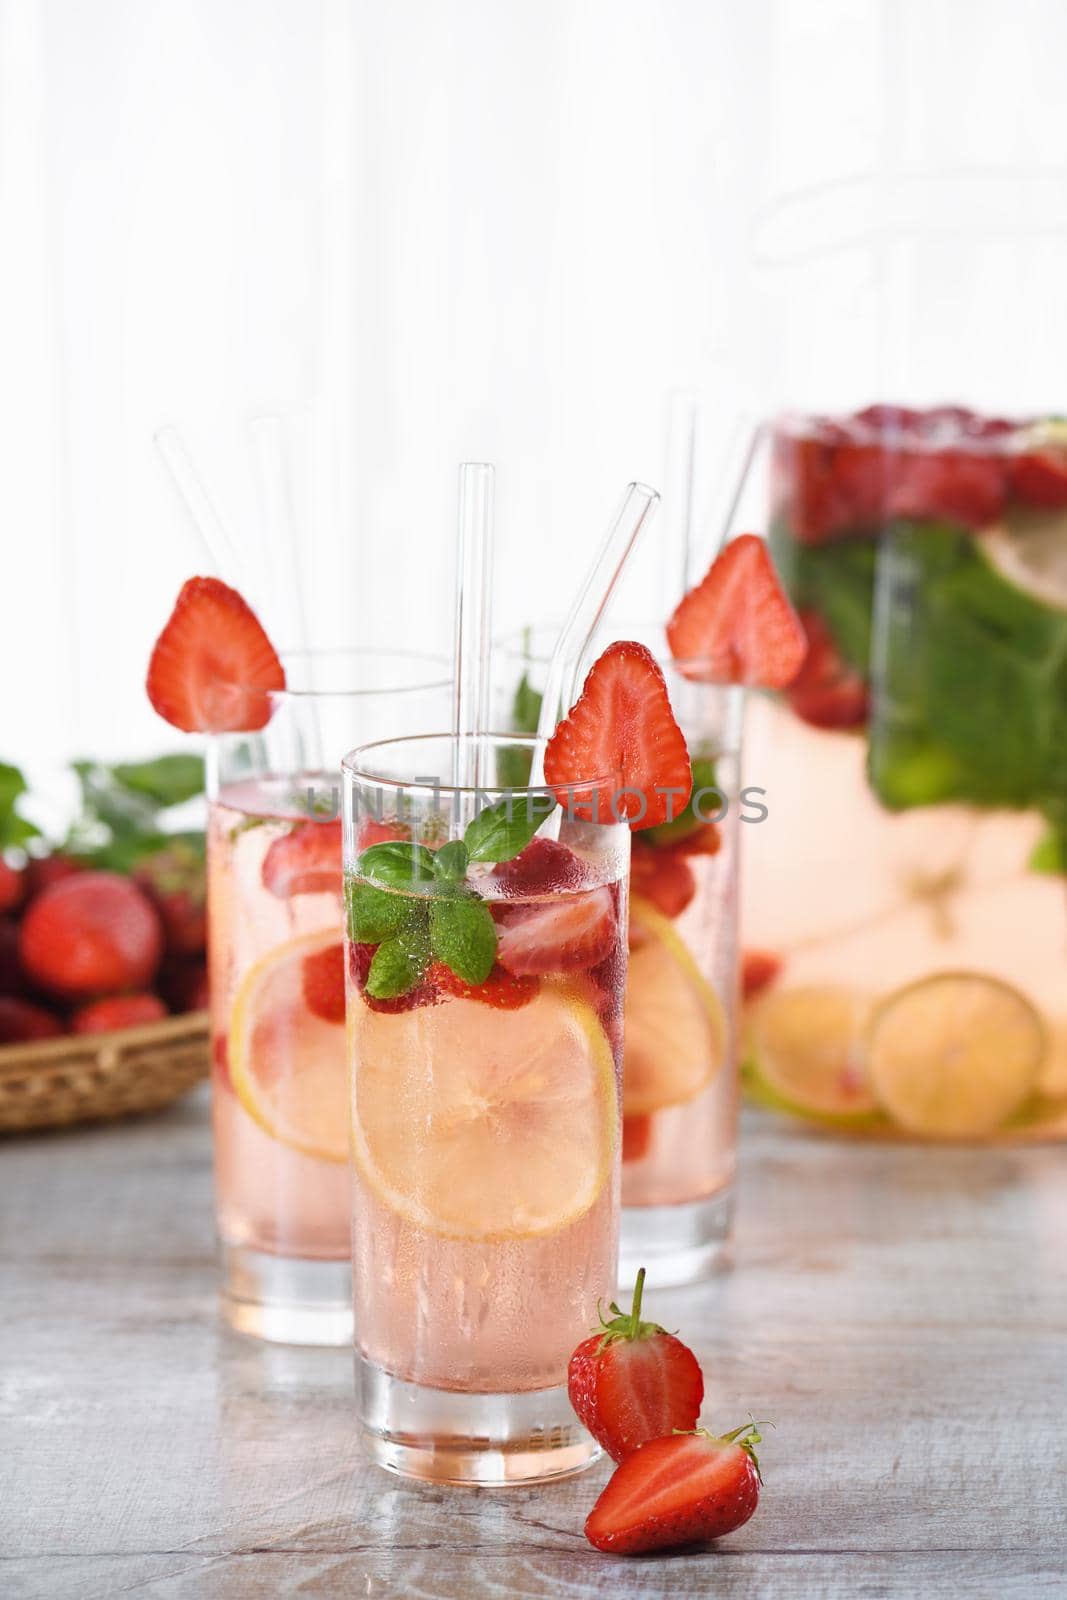 Summer strawberry cocktail or lemonade with basil. Cold refreshing organic soft drink with ripe berries in a glass